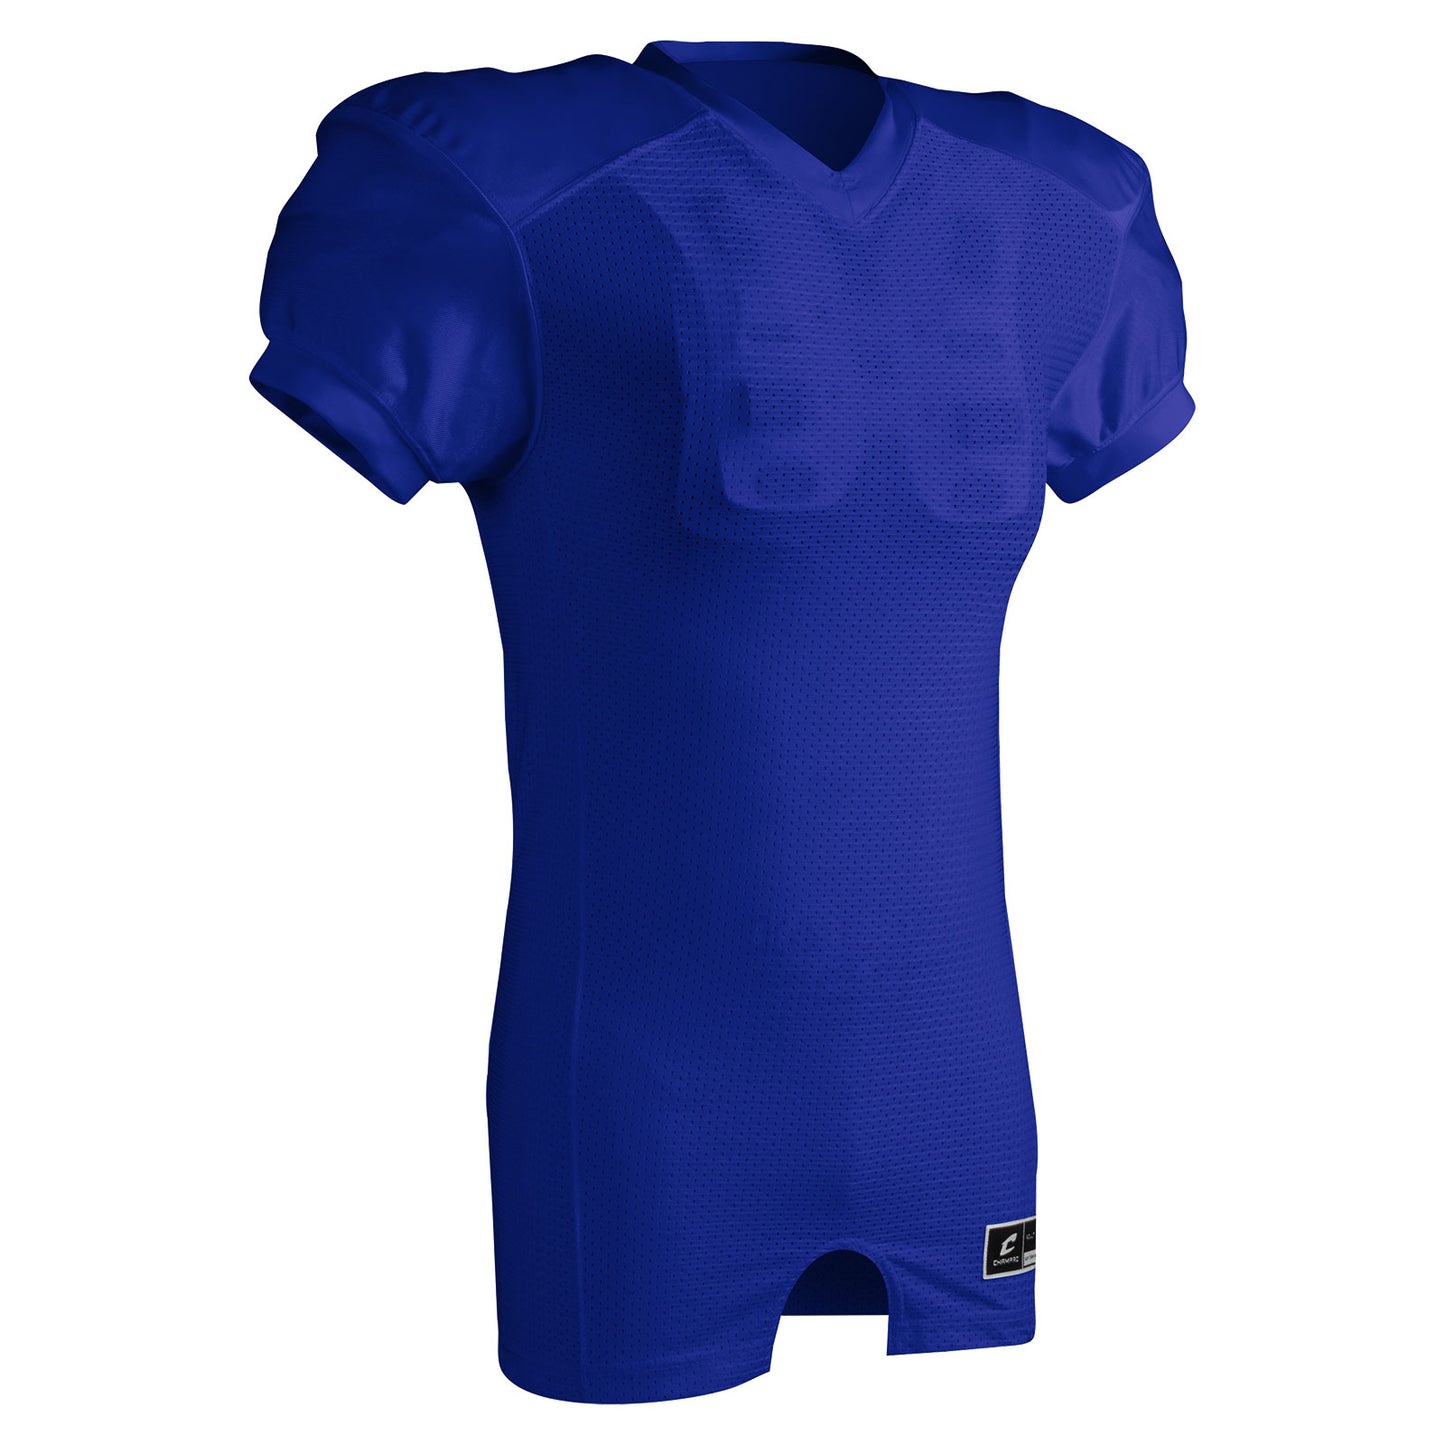 Pro-Fit Collegiate Fit Football Game Jersey ROYAL BODY